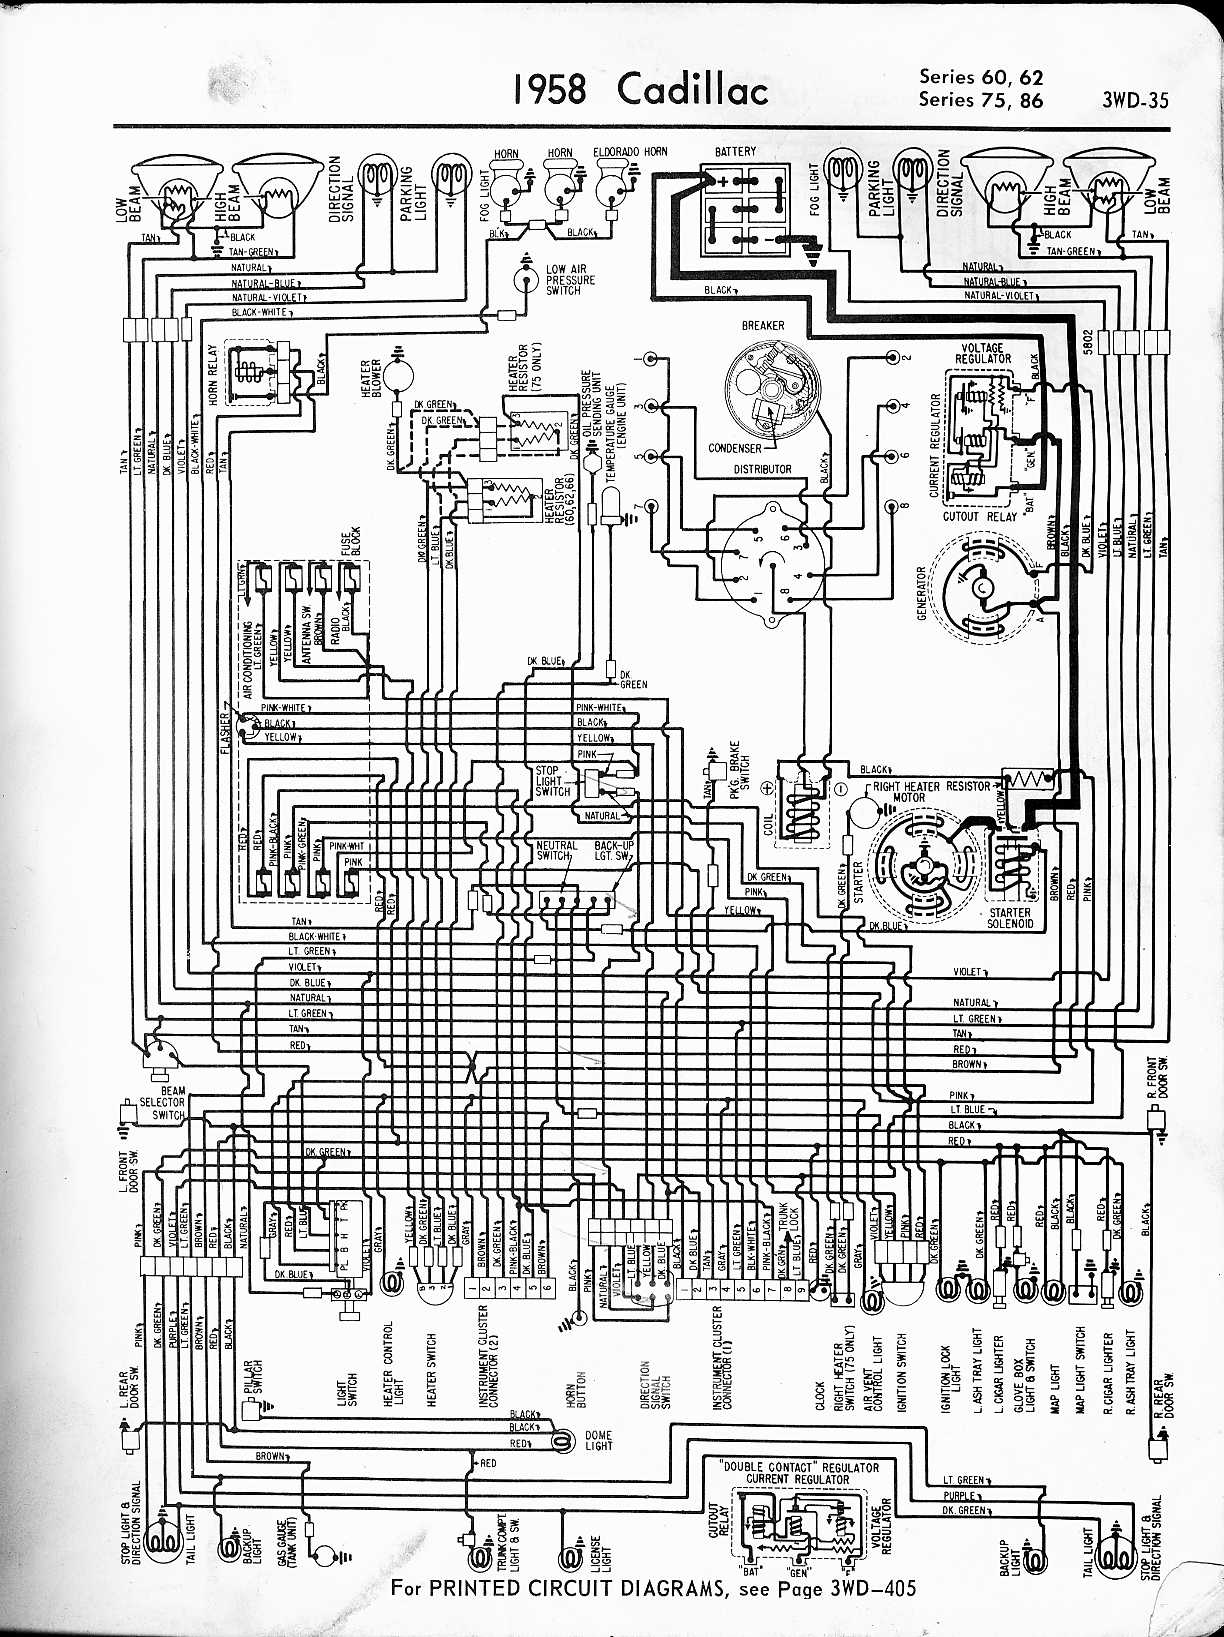 93 Cadillac Bose Wiring Schematic from www.oldcarmanualproject.com